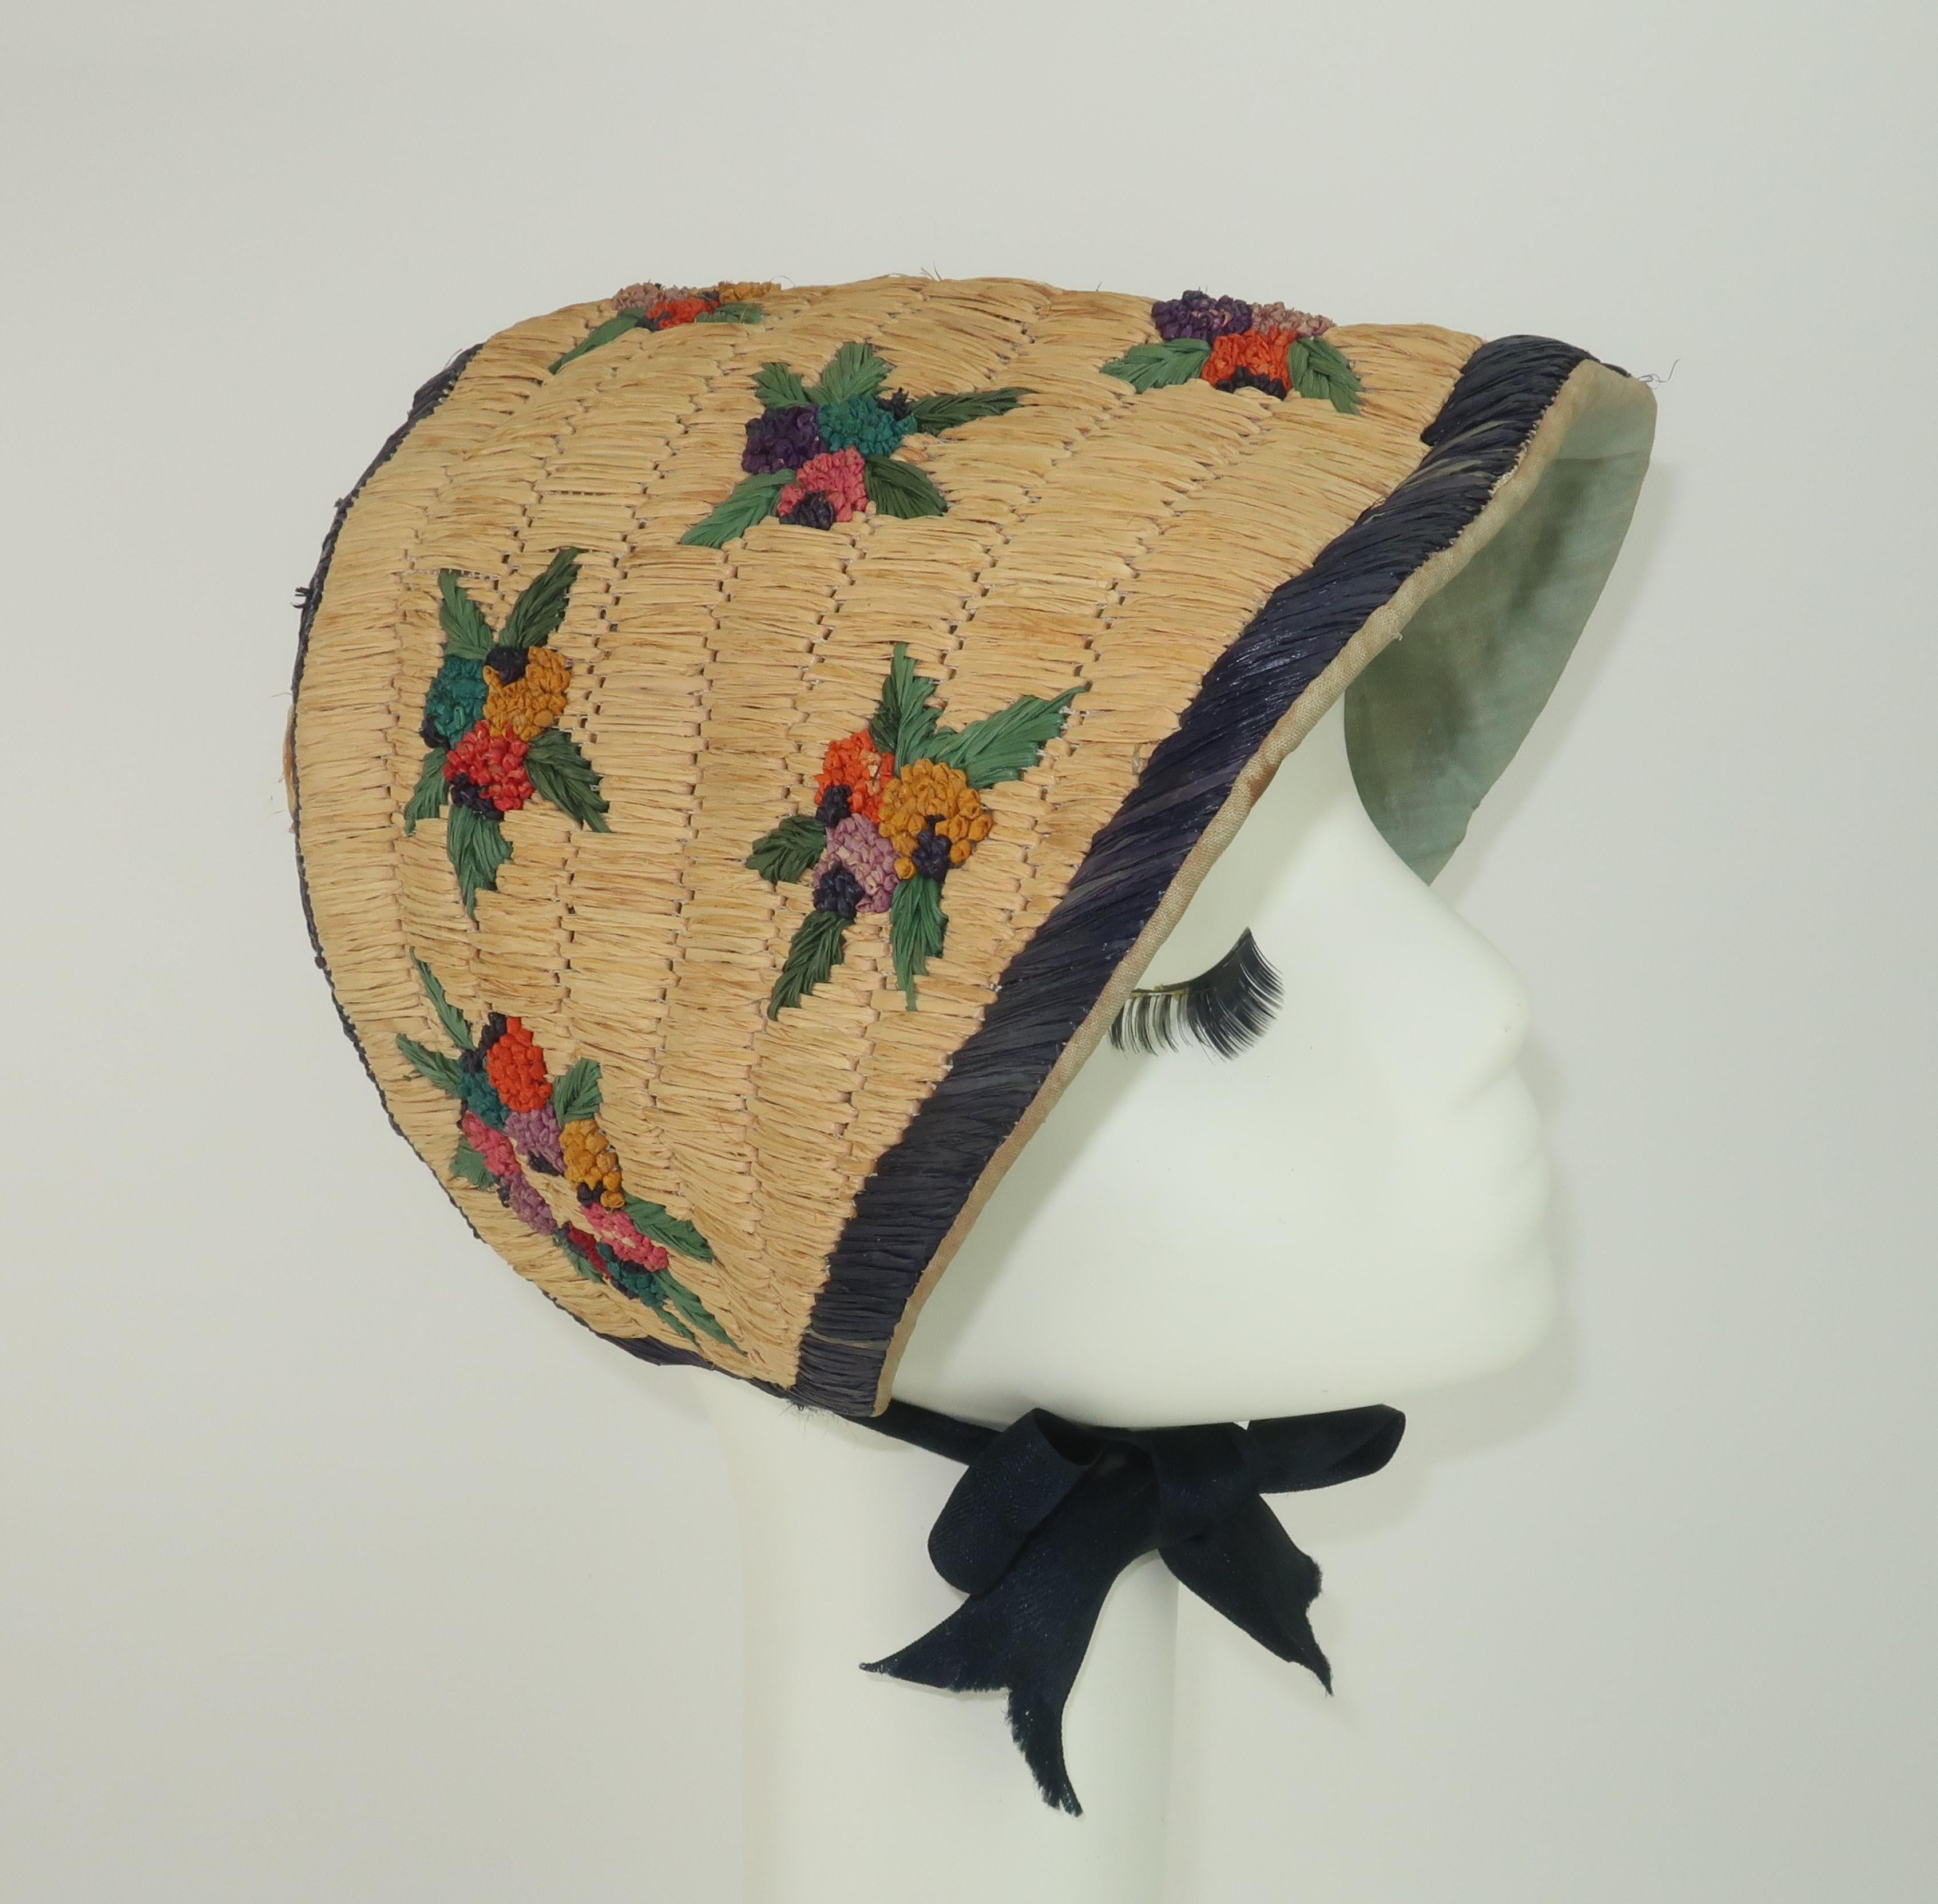 1930's charming straw bonnet with raffia embroidered floral motif made in France for the prominent 5th Avenue New York department store, Franklin Simon and their 'Petit Chapeau Shop'.  The bonnet is lined in a fine cotton and sports satin woven chin